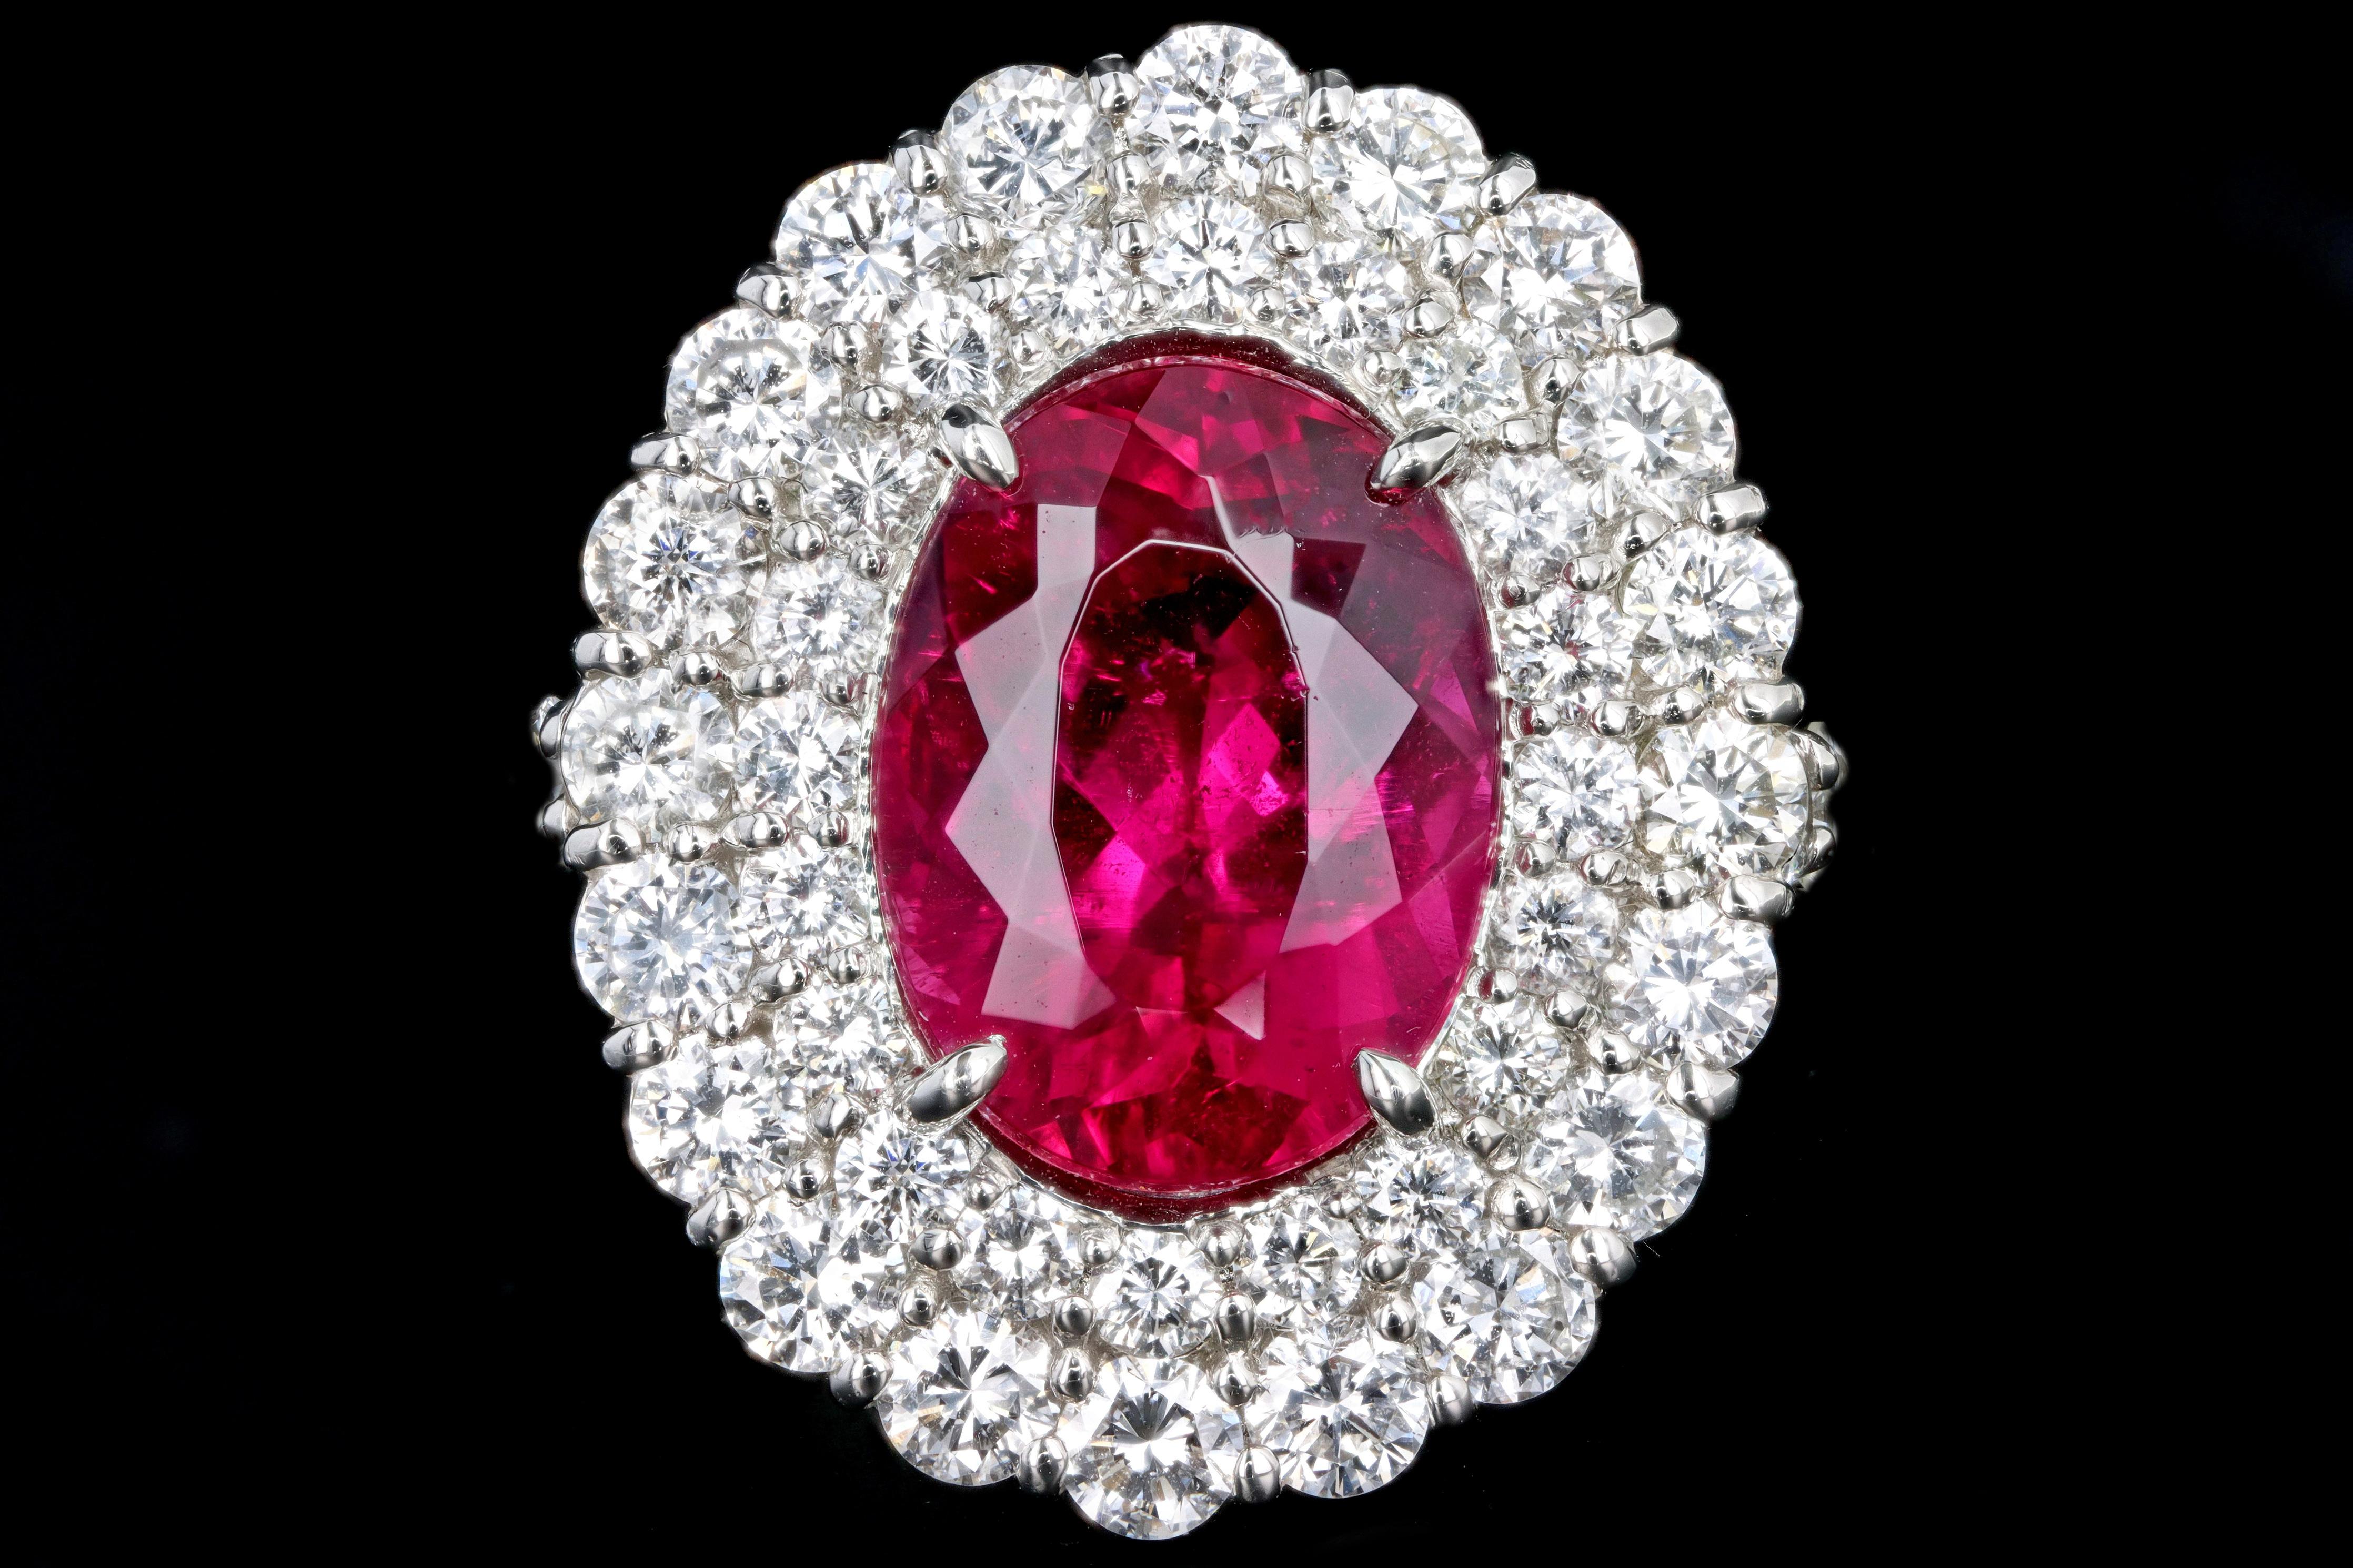 Era: Modern

Composition: Platinum 

Primary Stone: Oval Cut Rubellite Tourmaline

Carat Weight: Approximately 5.56 Carats

Accent Stone: Round Brilliant Diamonds 

Carat Weight: Approximately 2.79 Carats Total

Color/ Clarity: G/H - VS2/SI1

Ring